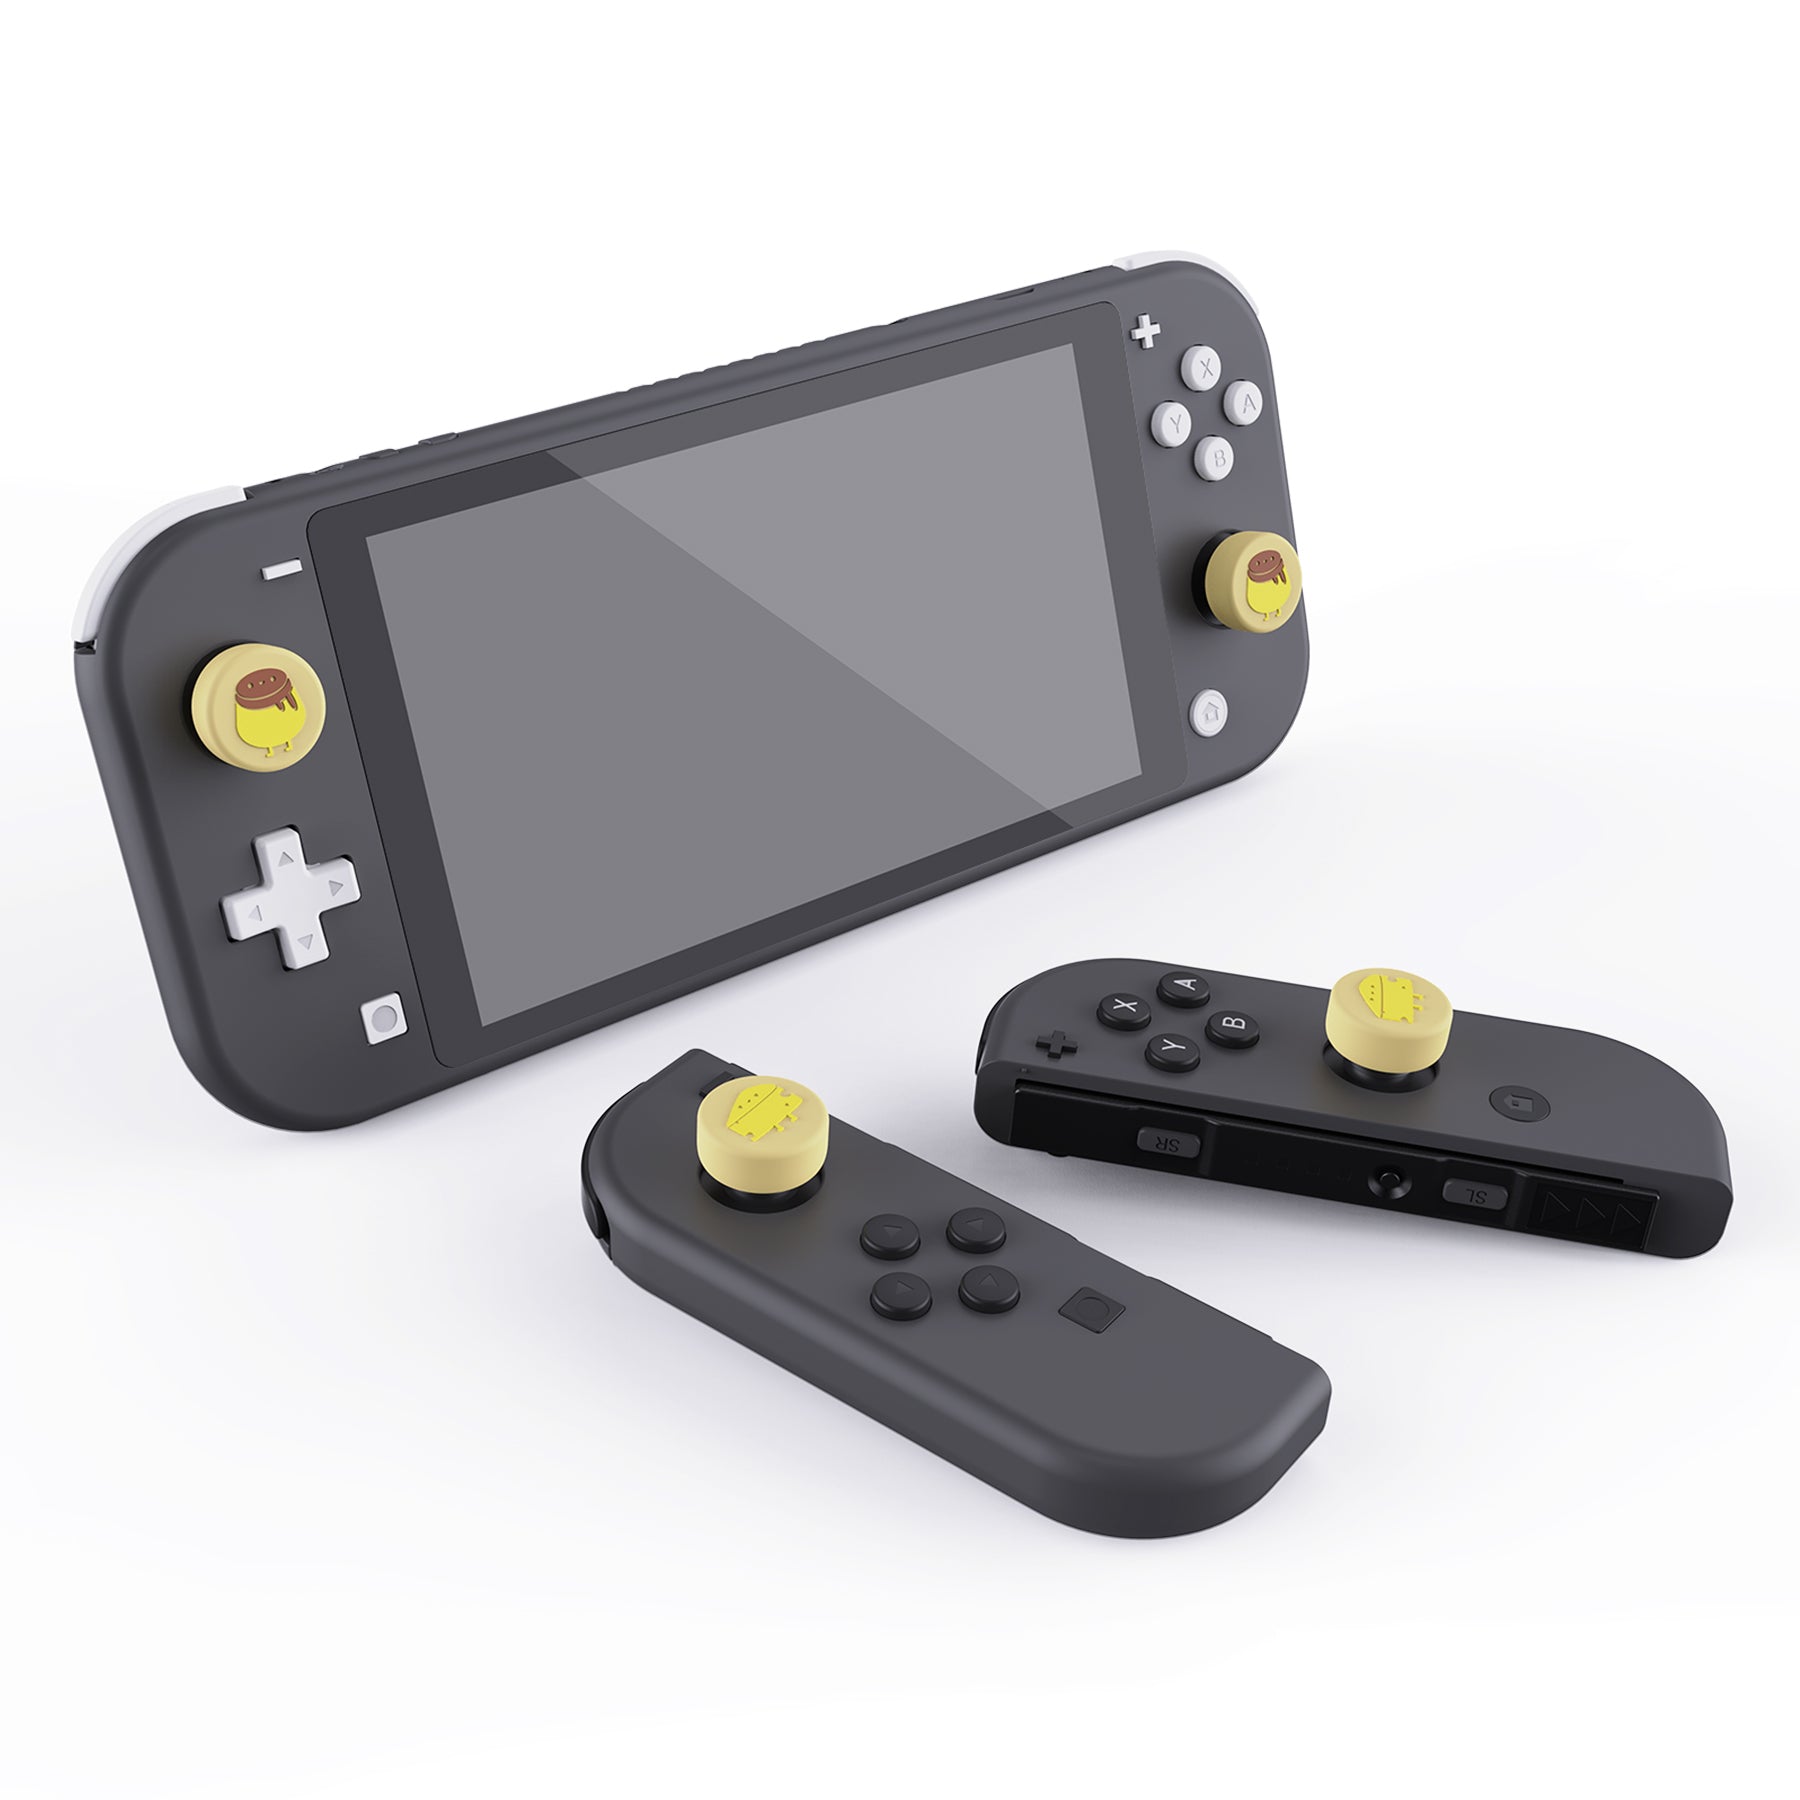 PlayVital Cheese & Pudding Cute Switch Thumb Grip Caps, Joystick Caps for Nintendo Switch Lite, Silicone Analog Cover Thumbstick Grips for Switch OLED Joycon - Cream Yellow - NJM1101 playvital